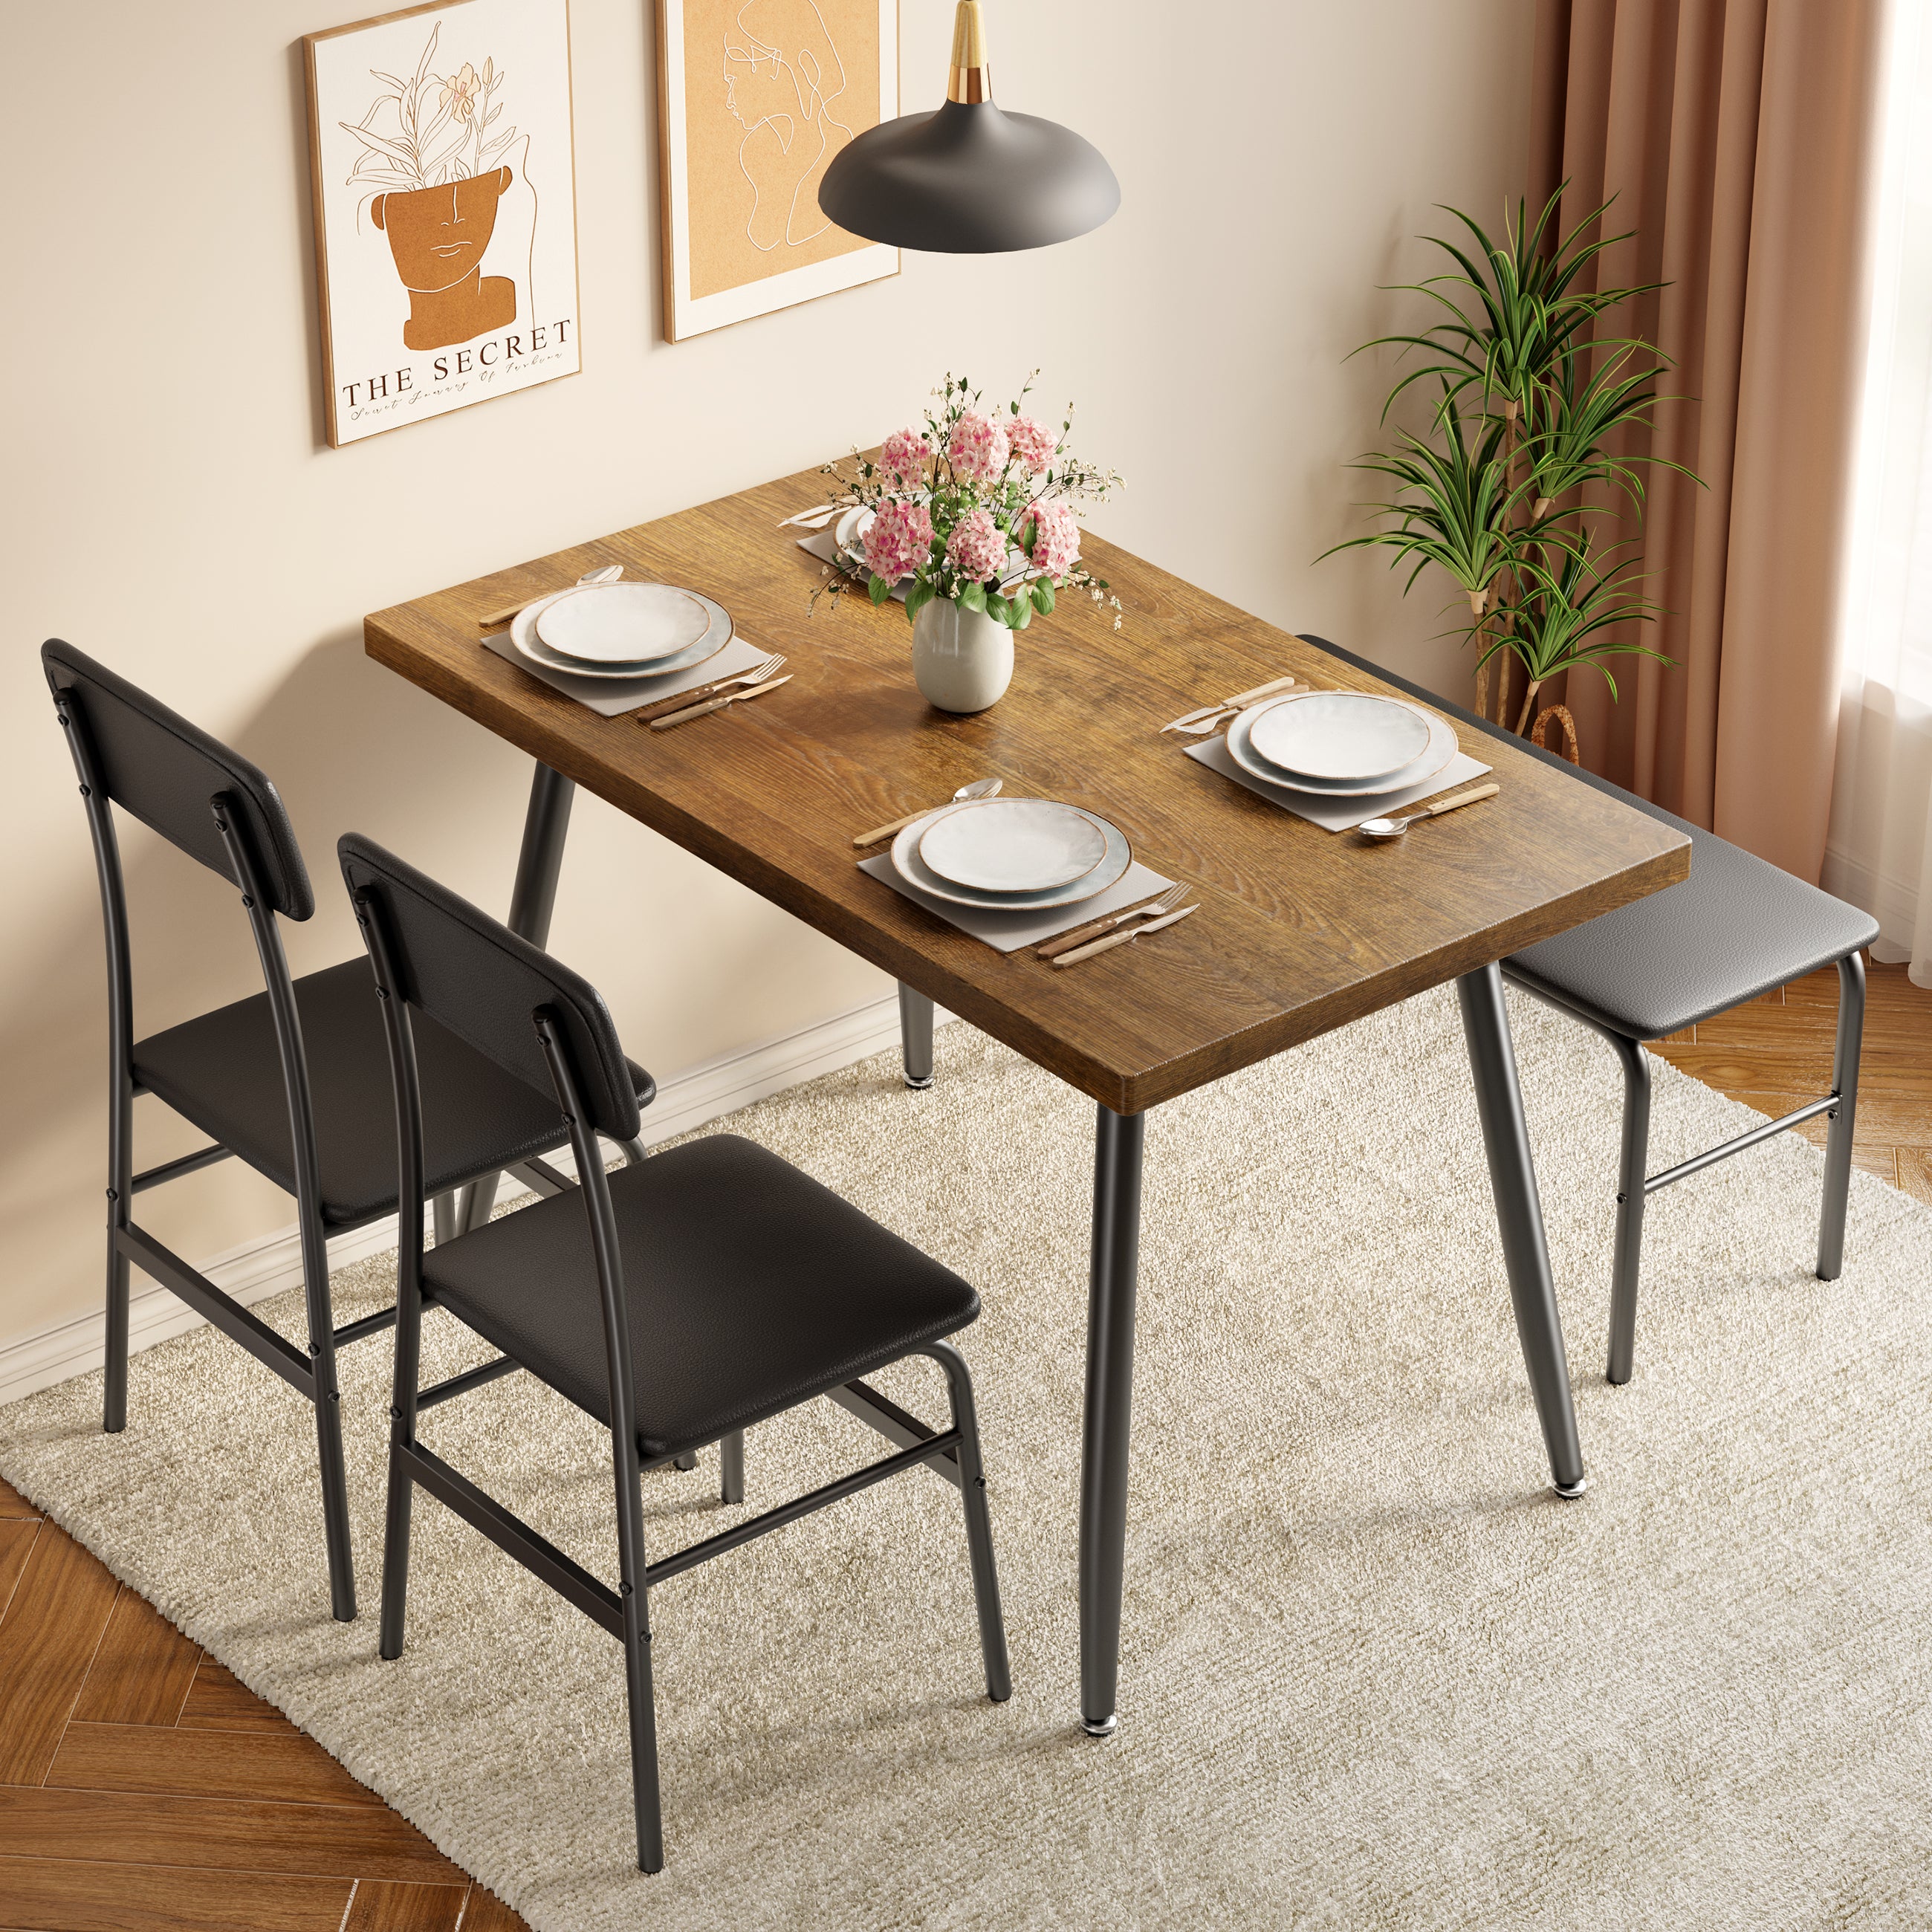 Gizoon TB80 Dining Table Set for 4 with Bench and 2 Chairs